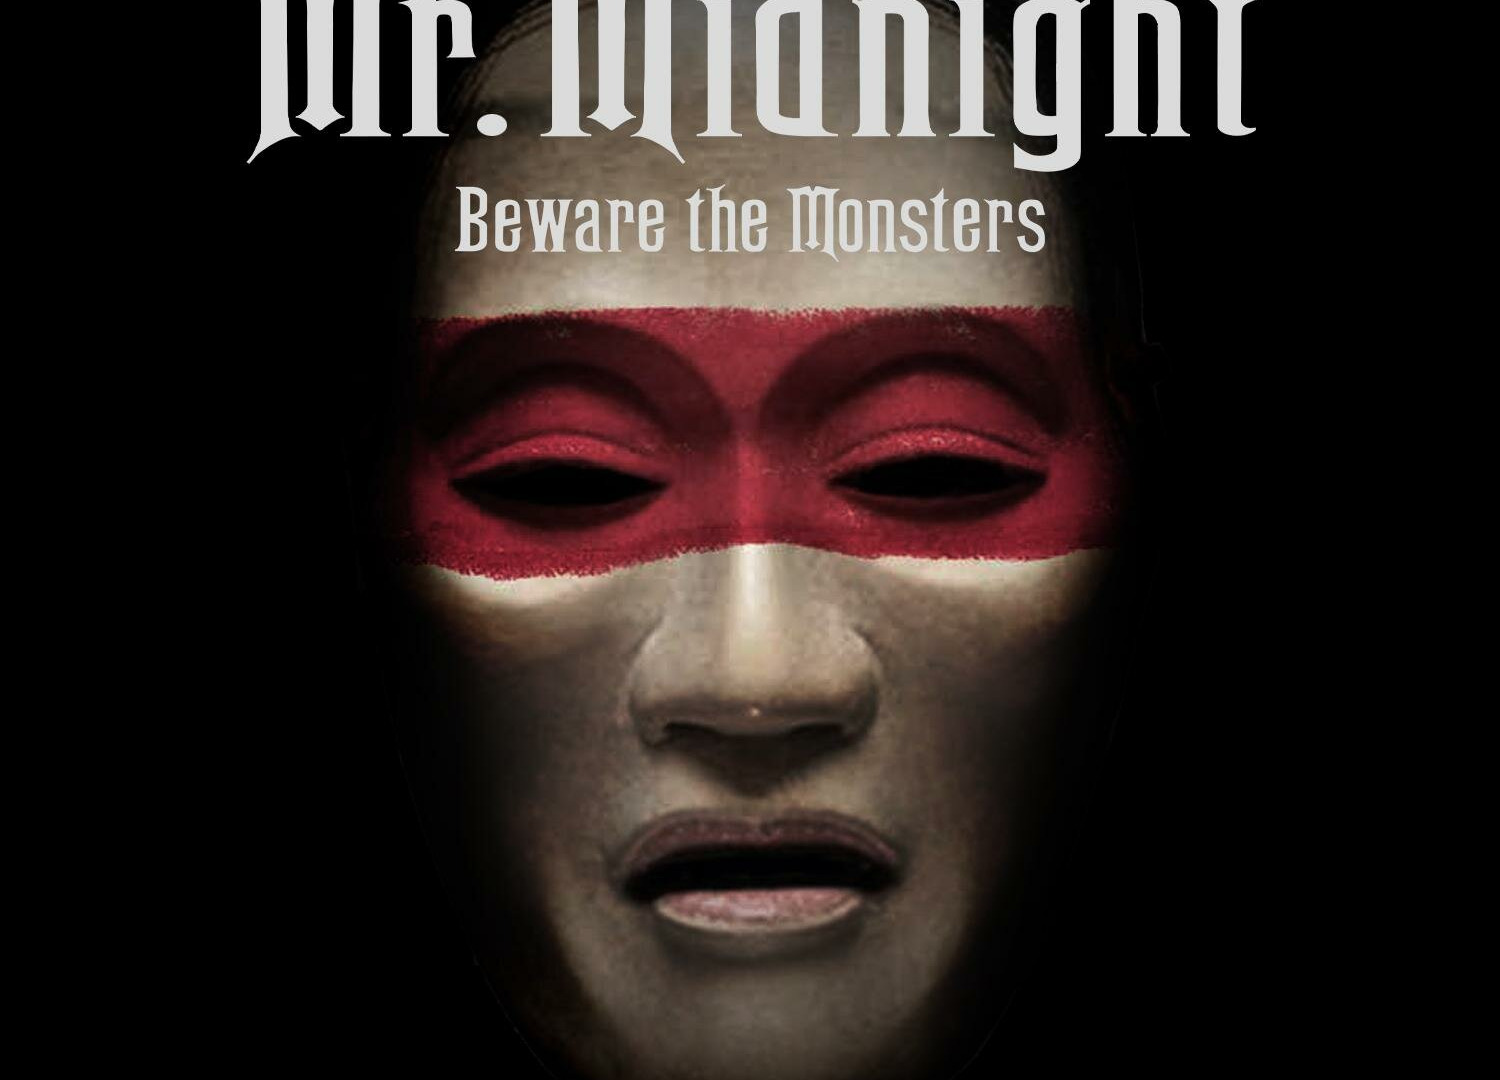 Show Mr. Midnight: Beware the Monsters